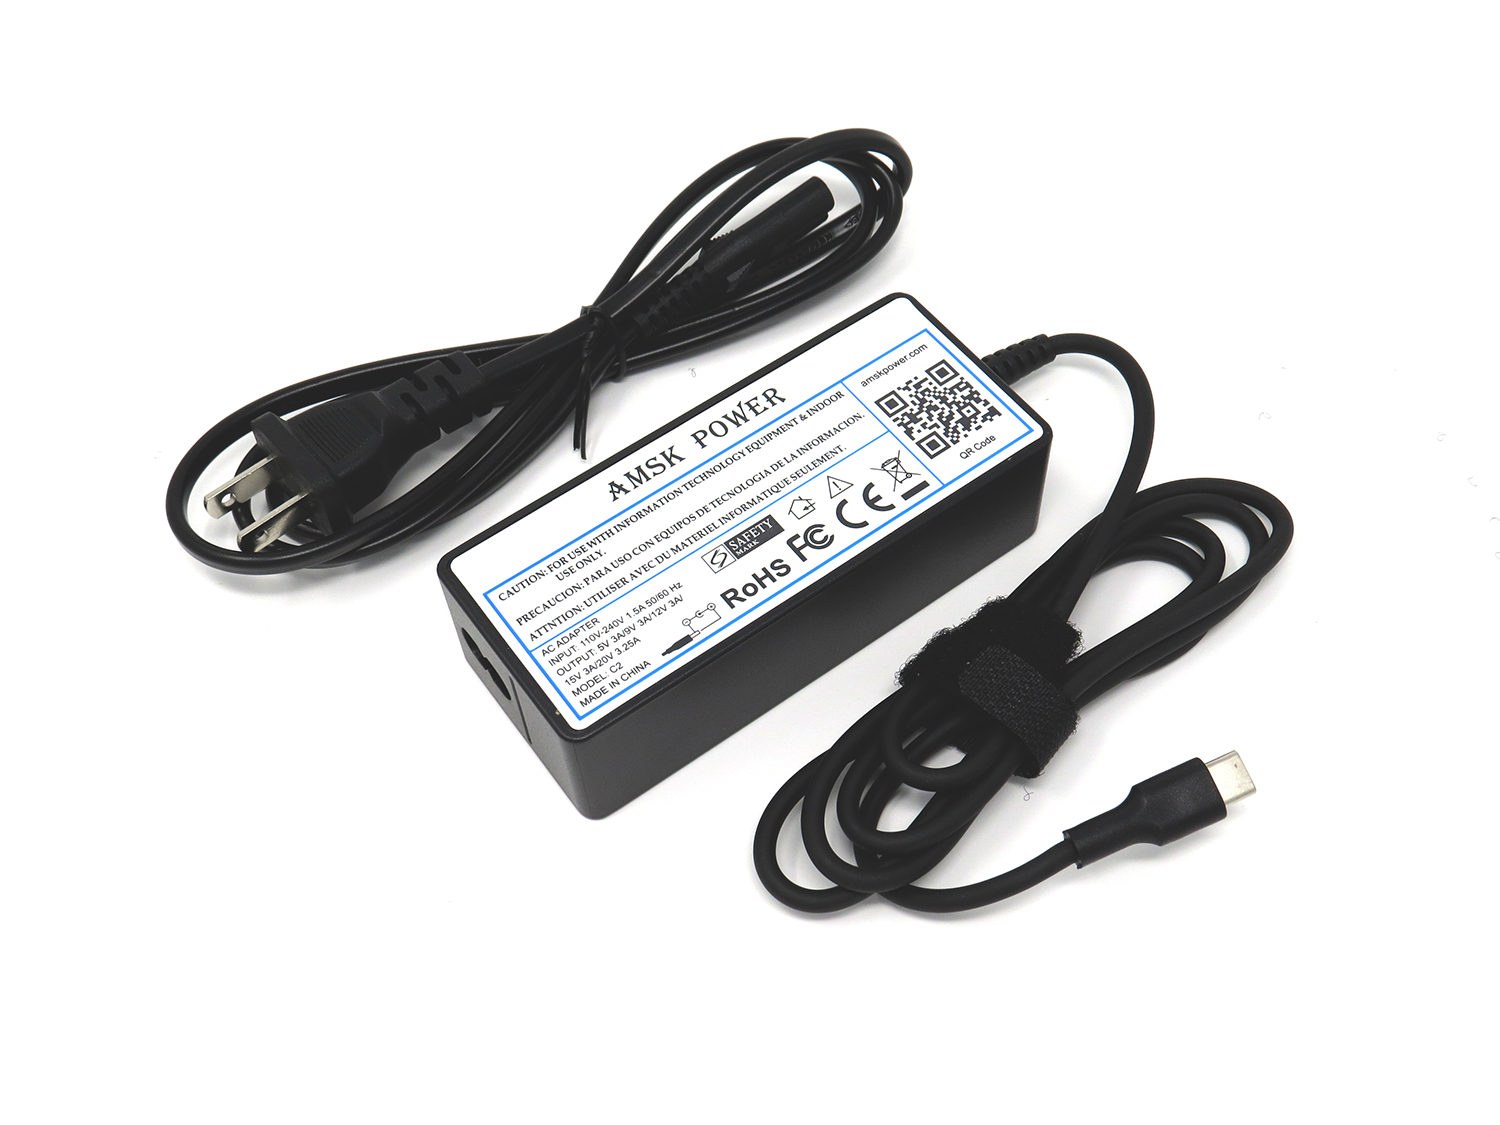 AMSK POWER Ac Adapter 65W Type-C Charger Power Supply For Dell Latitude 5285 2-in-1 Laptop - image 1 of 1